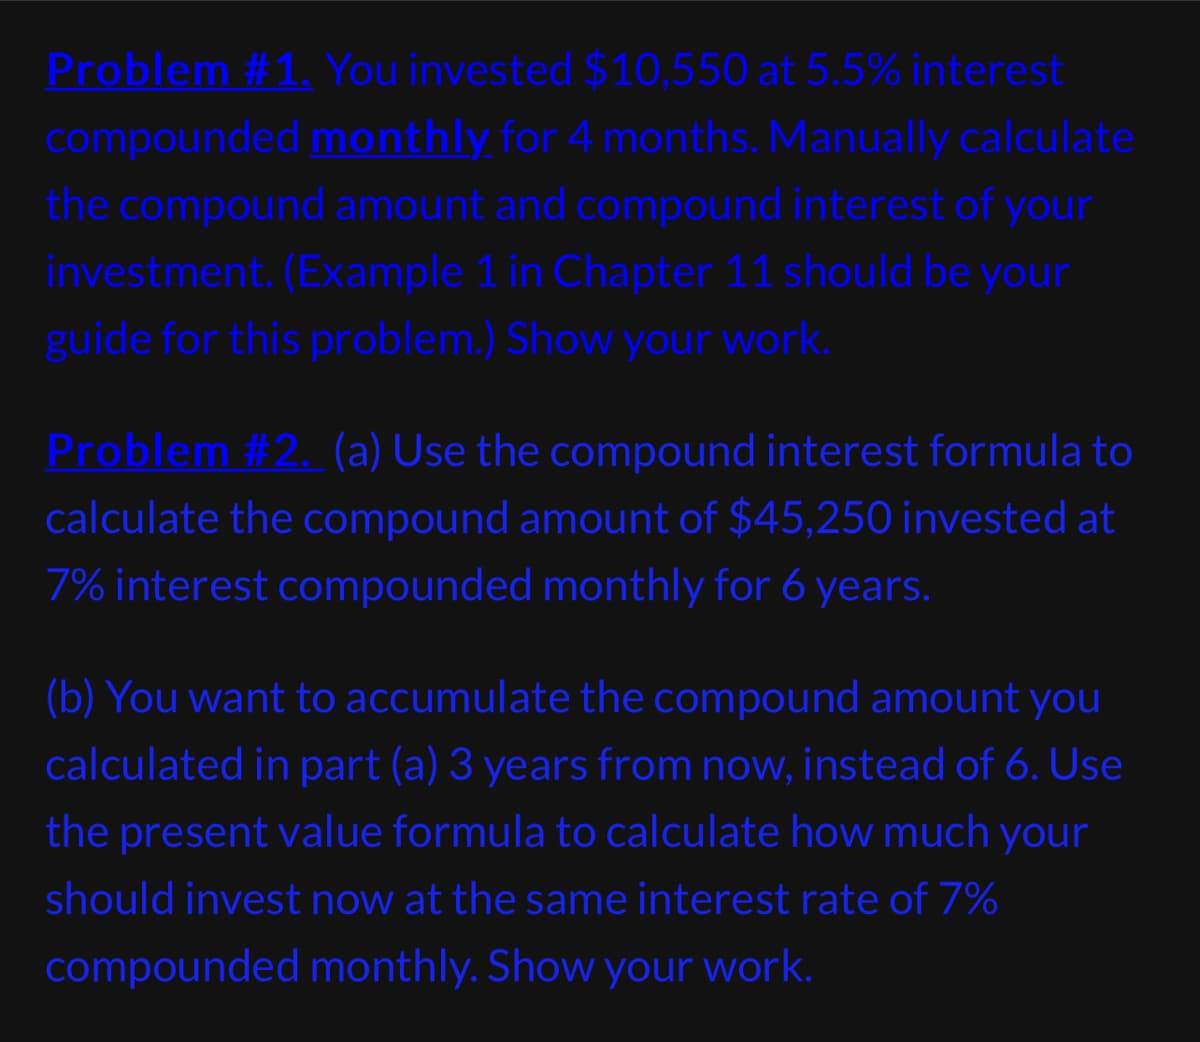 Problem #1. You invested $10,550 at 5.5% interest
compounded monthly for 4 months. Manually calculate
the compound amount and compound interest of your
investment. (Example 1 in Chapter 11 should be your
guide for this problem.) Show your work.
Problem #2. (a) Use the compound interest formula to
calculate the compound amount of $45,250 invested at
7% interest compounded monthly for 6 years.
(b) You want to accumulate the compound amount you
calculated in part (a) 3 years from now, instead of 6. Use
the present value formula to calculate how much your
should invest now at the same interest rate of 7%
compounded monthly. Show your work.